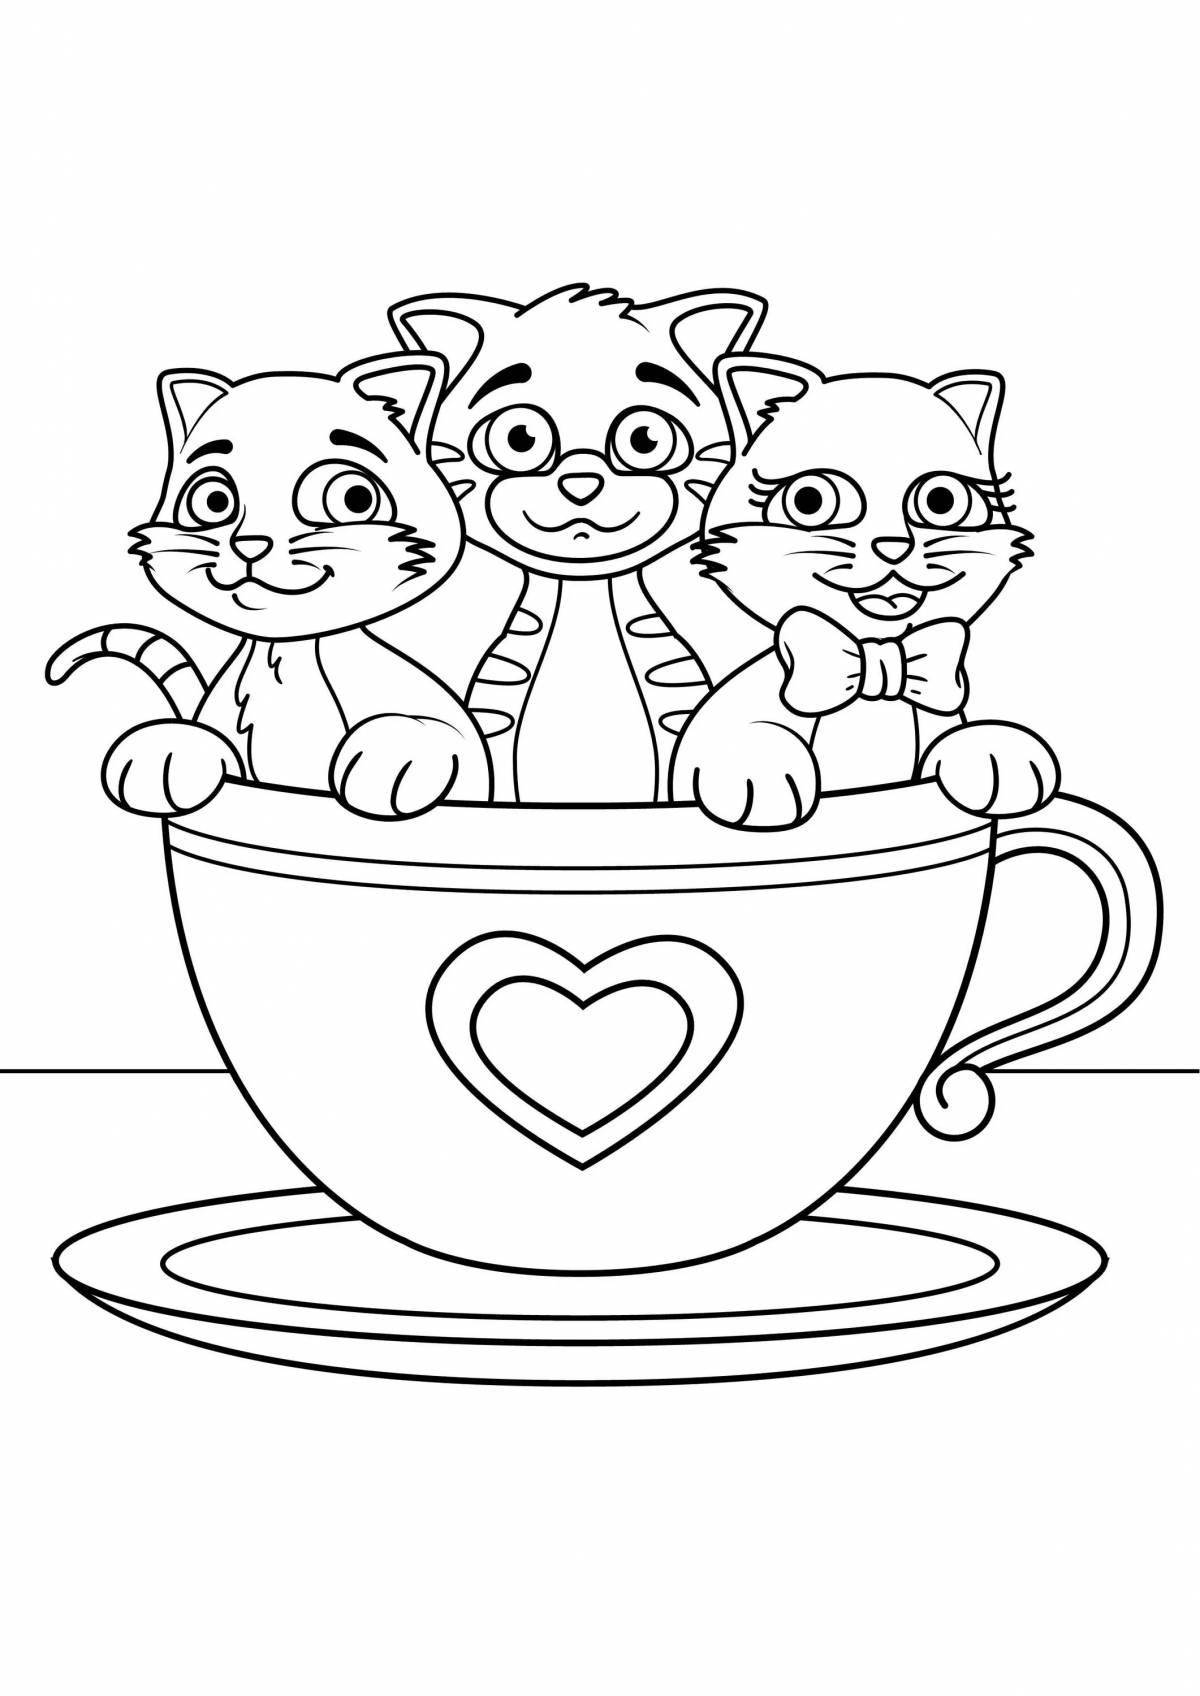 Coloring page affectionate kitten in a mug